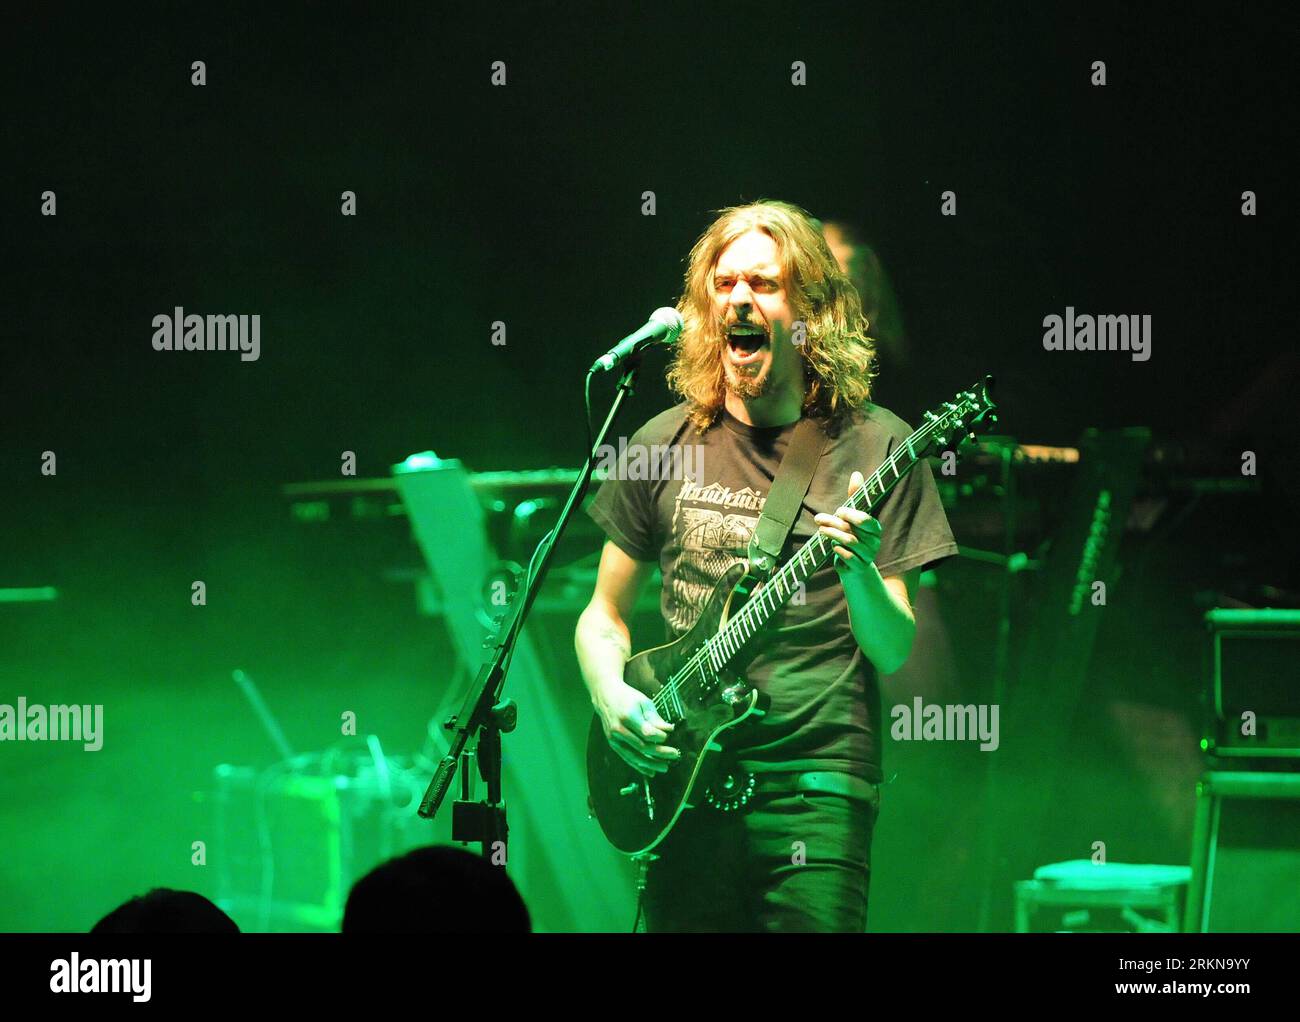 Bildnummer: 57055635  Datum: 11.02.2012  Copyright: imago/Xinhua (120212) -- BEIJING, Feb. 12, 2012 (Xinhua) -- Singer and guitarist Mikael Akerfeldt of Opeth, a famous Swedish metal band, performs during a concert in Beijing, capital of China, Feb. 11, 2012. Opeth, consisting of five members, is famous for its integration of the classic and romantic elements of north European art. (Xinhua/Xiao Xiao) (zc) CHINA-BEIJING-MUSIC-SWEDEN S OPETH (CN) PUBLICATIONxNOTxINxCHN People Kultur Entertainment Musik Aktion xda x0x 2012 quer      57055635 Date 11 02 2012 Copyright Imago XINHUA  Beijing Feb 12 Stock Photo